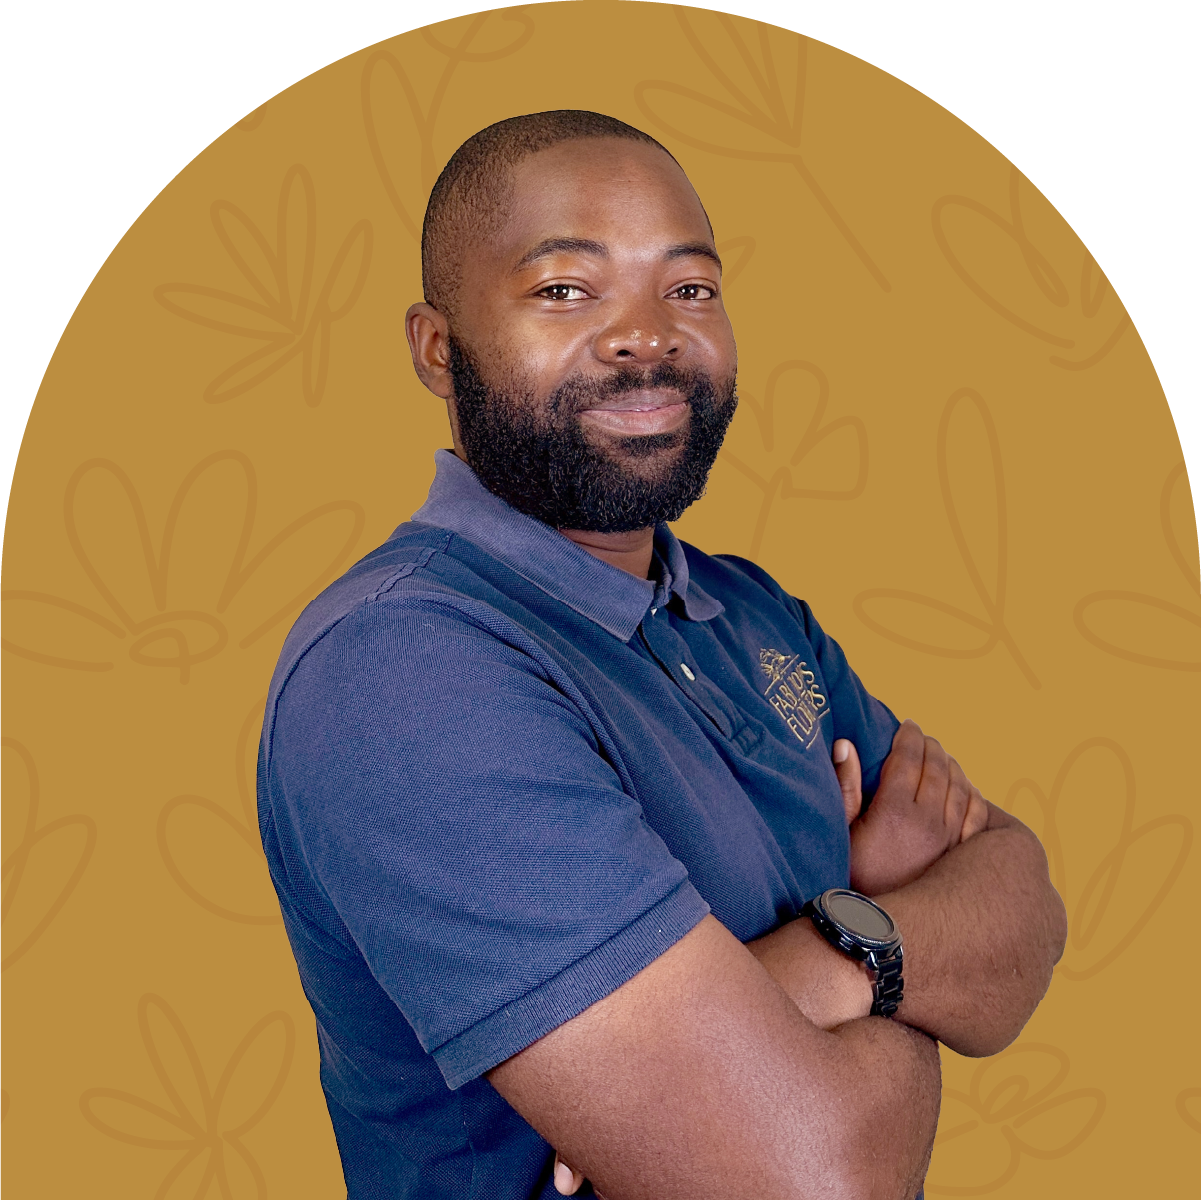 Portrait of Tinashe, a team member at Fabulous Flowers, wearing a navy polo shirt against a mustard yellow background. MEET THE TEAM at Fabulous Flowers and Gifts.